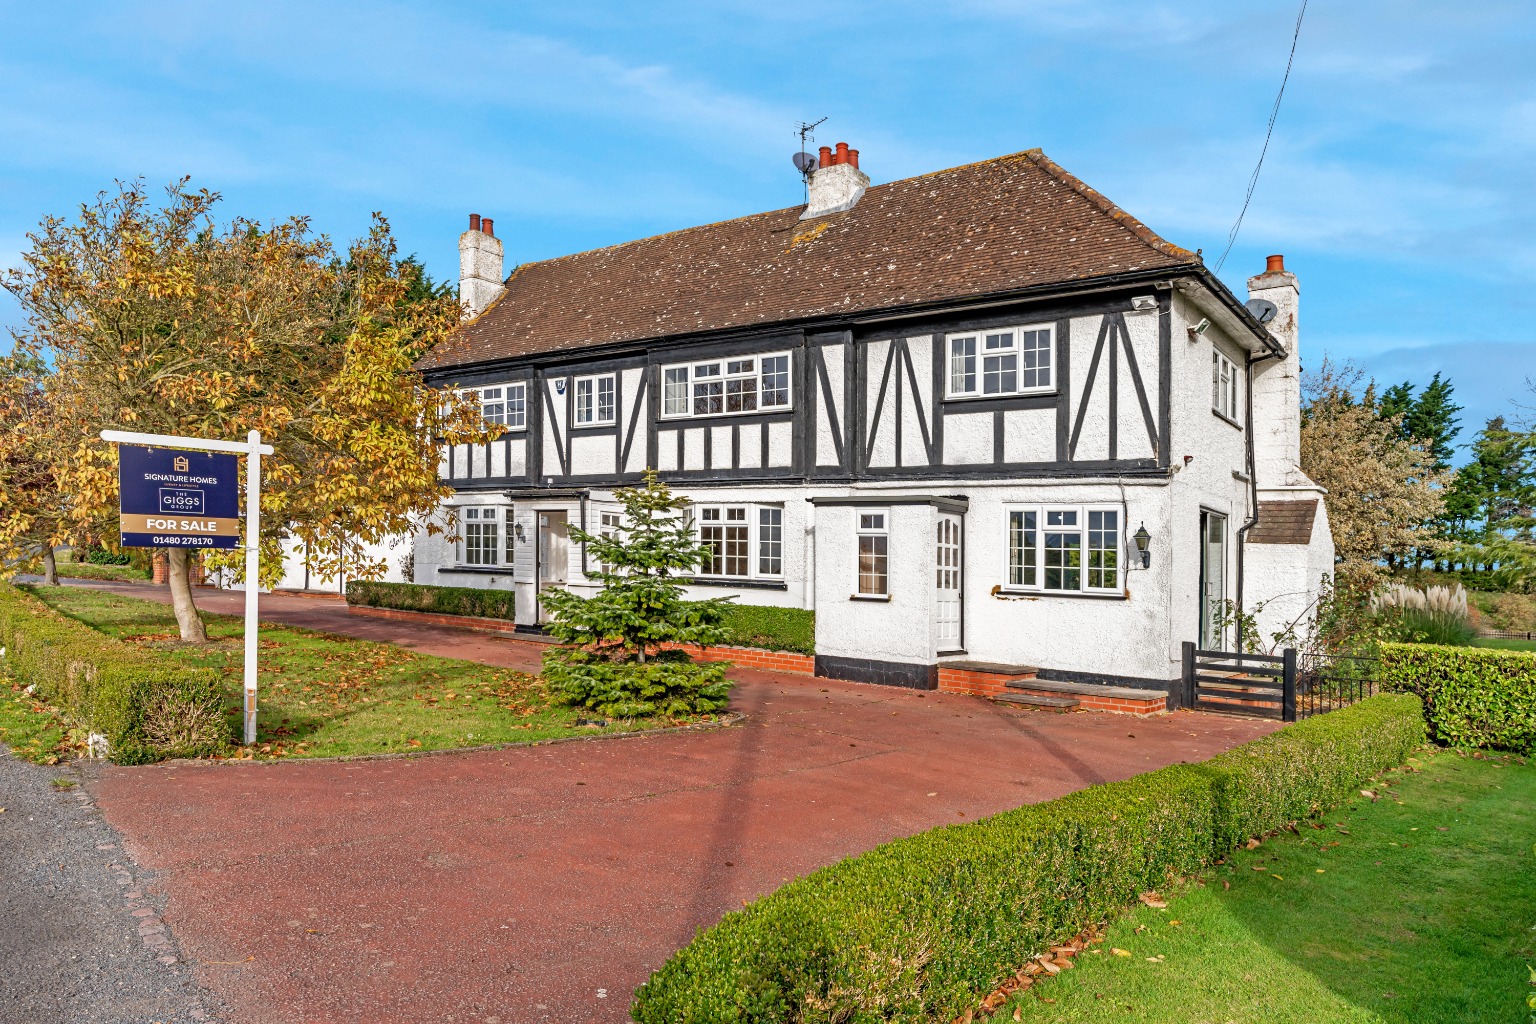 Rarely does a property with so much potential come to market. Built in 1921 and formerly The Beehive Public House, Cherry Trees boasts a highly sought-after combination of ground floor dominant accommodation and four acres of beautiful grounds, including a fishing lake over an acre in size.